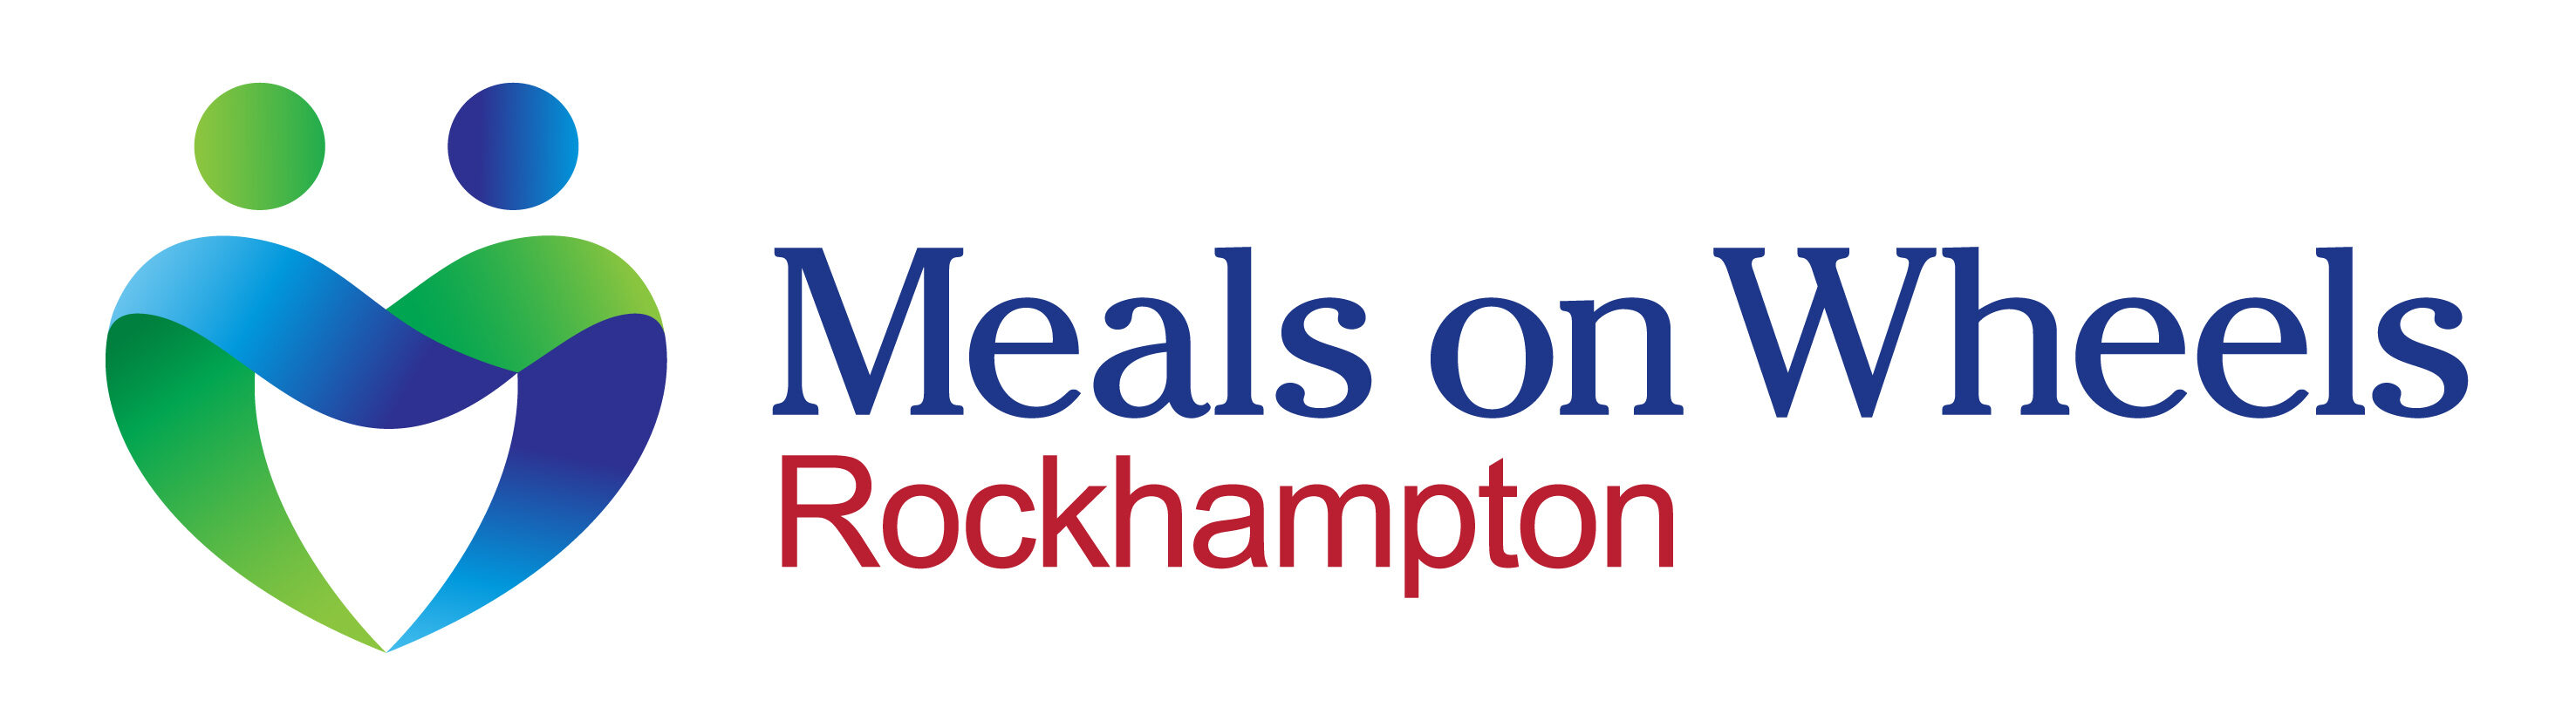 Welcome to Rockhampton Meals on Wheels